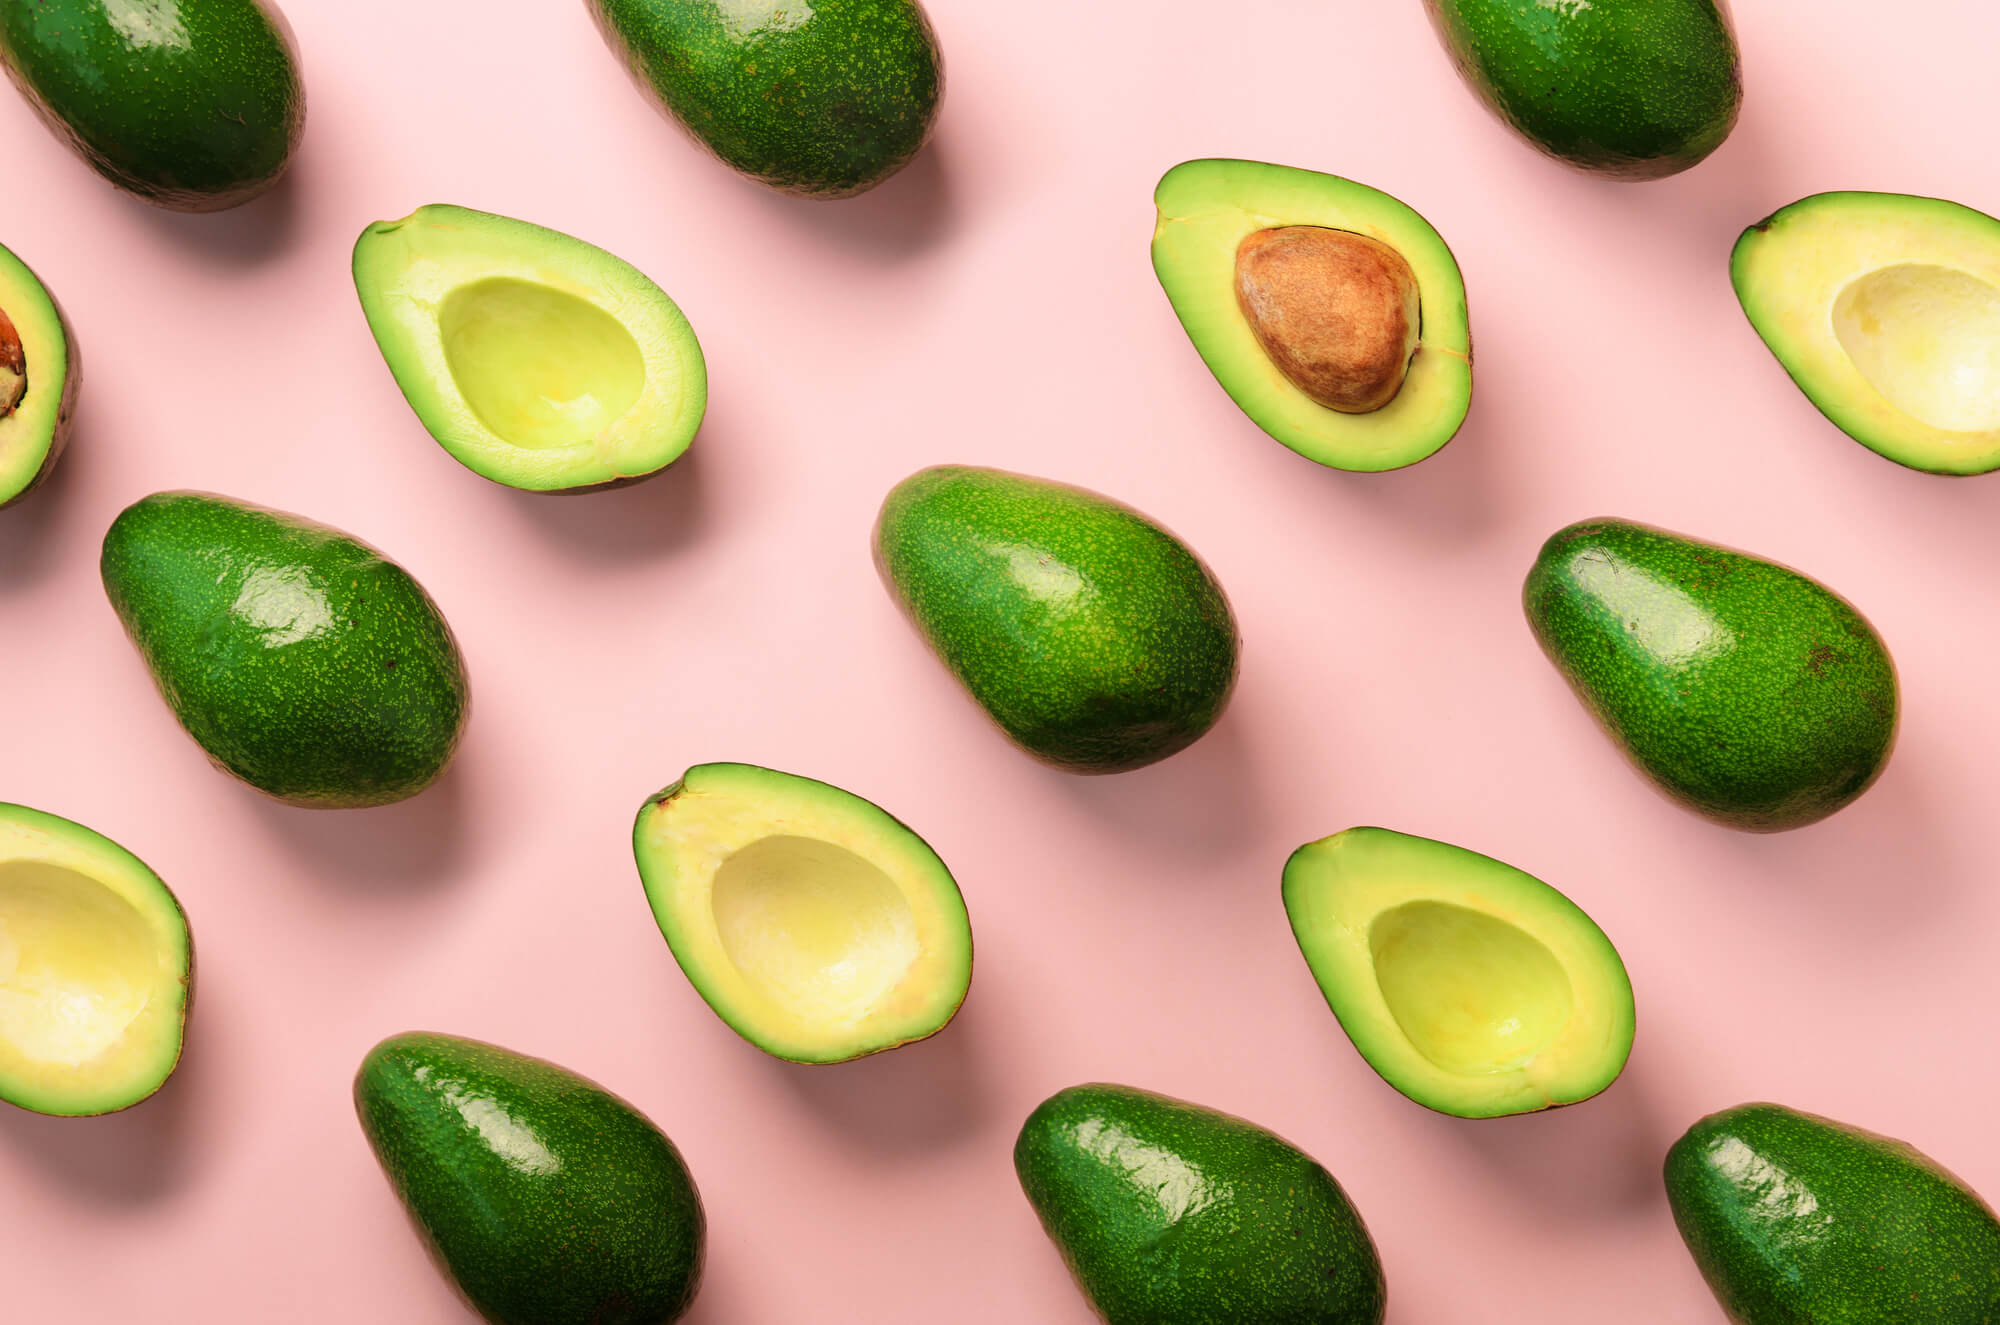 Avocados on a pink background